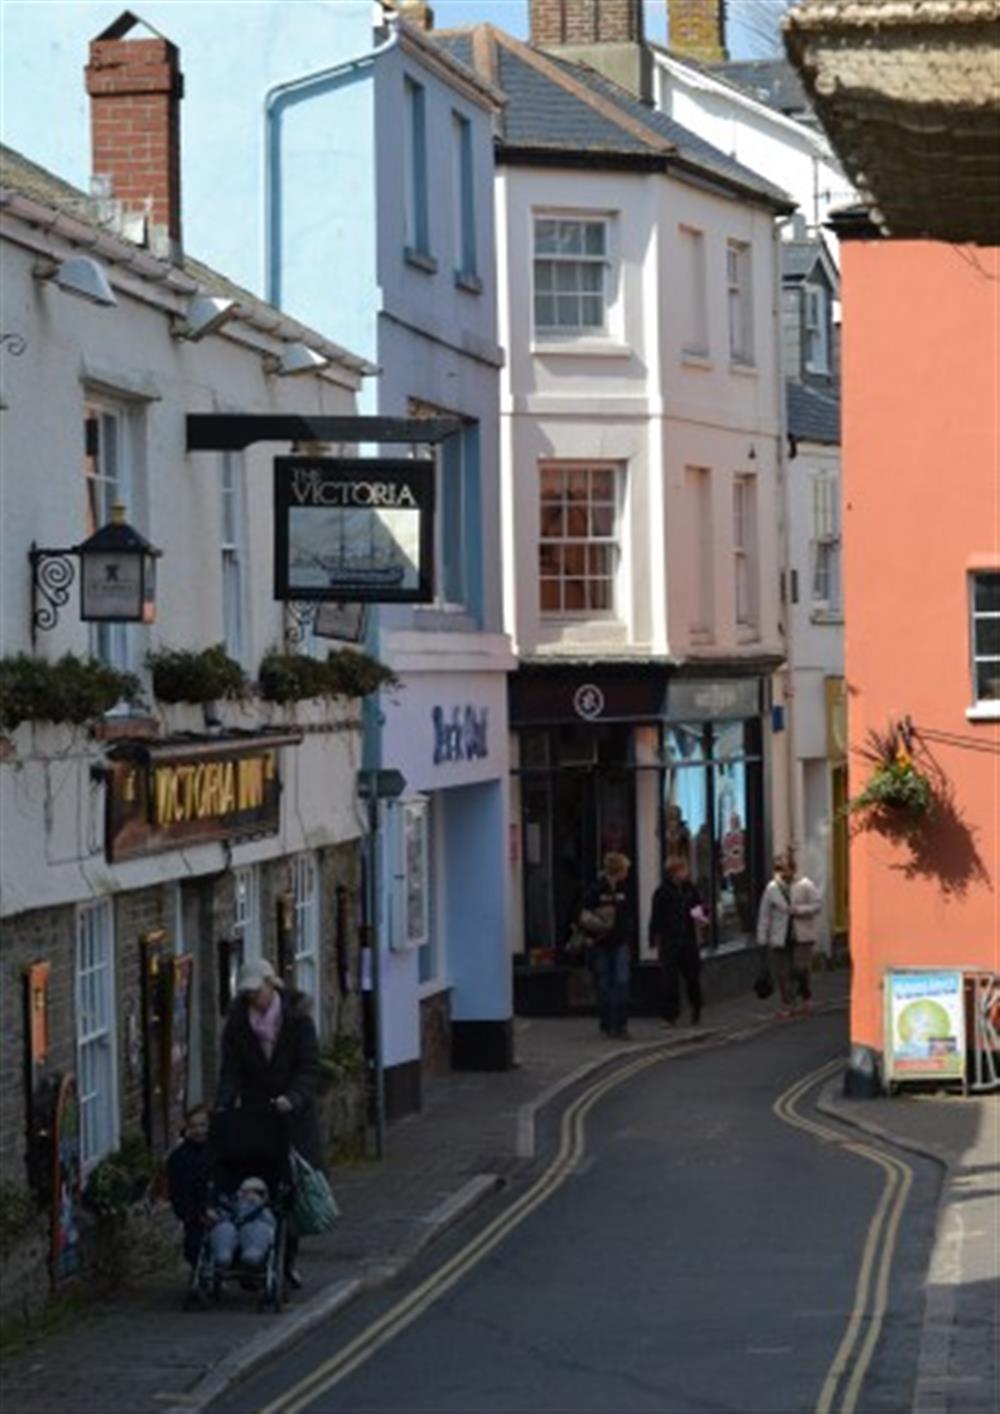 Great pubs, restaurants and shops in the town centre